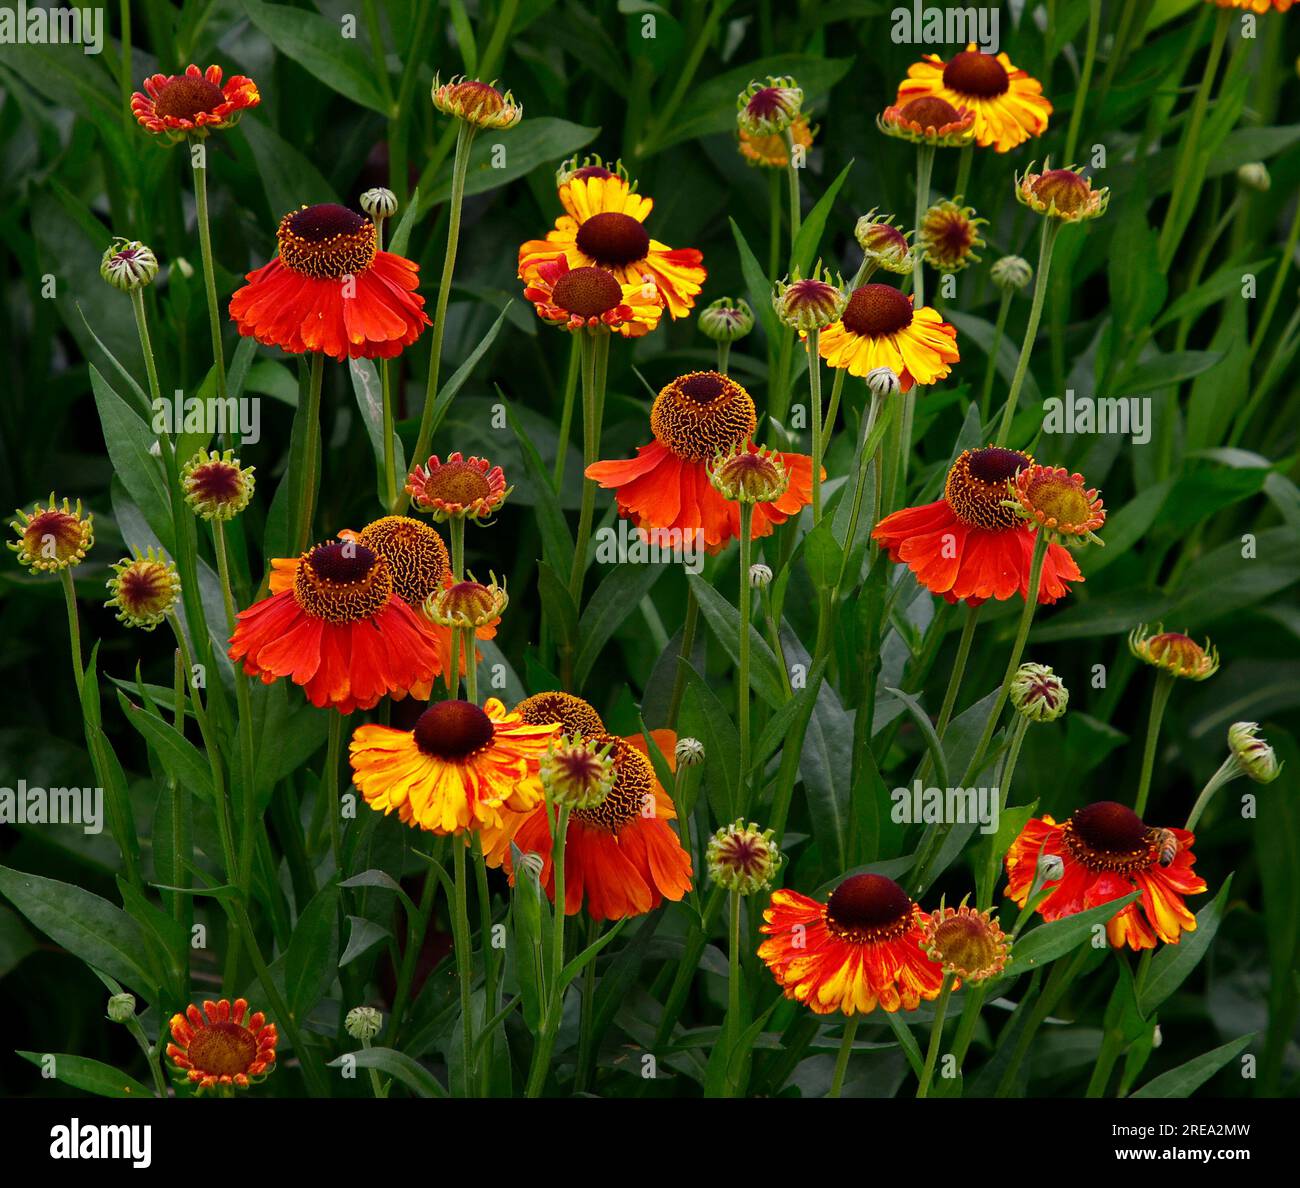 Closeup of the multicoloured herbaceous perennial garden plant helenium Waltraut or Sneezeweed filling the frame. Stock Photo